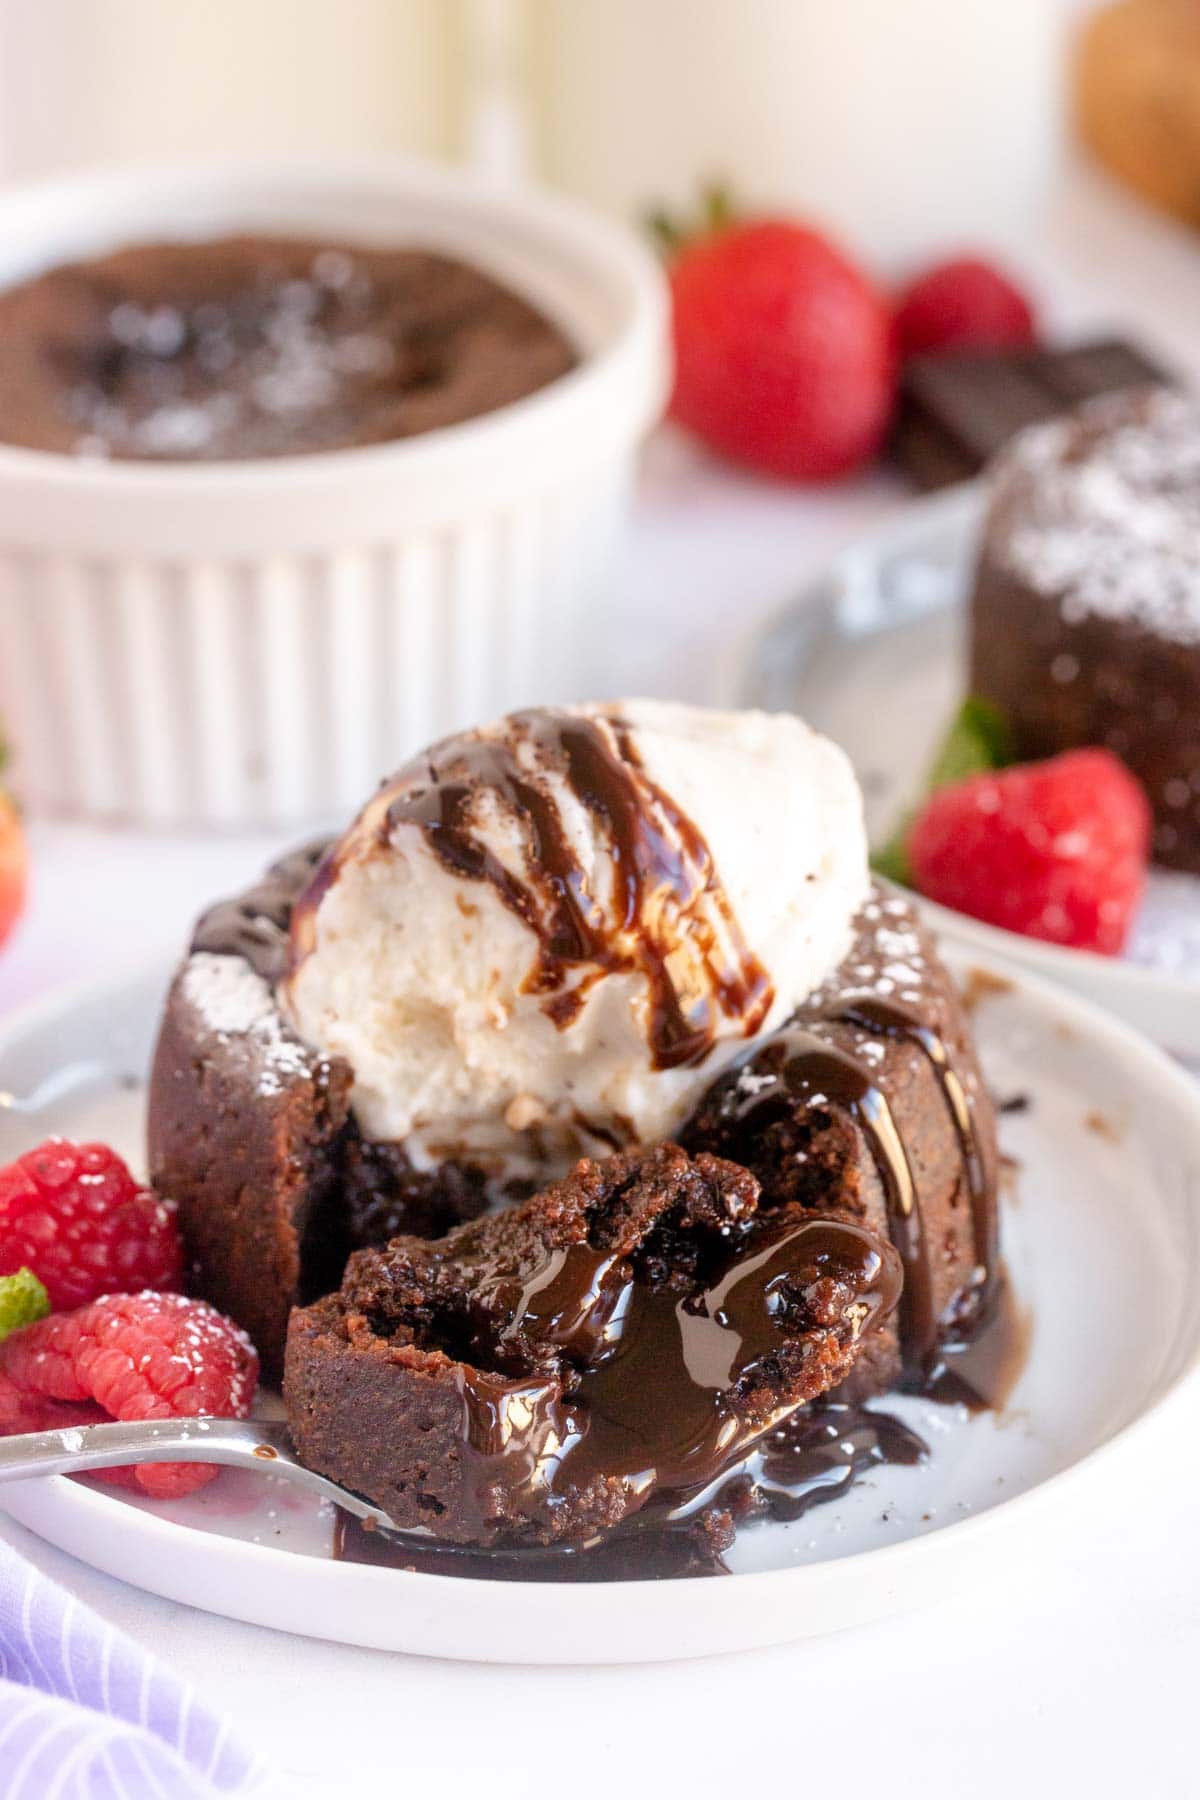 Chocolate lava cake topped with ice cream